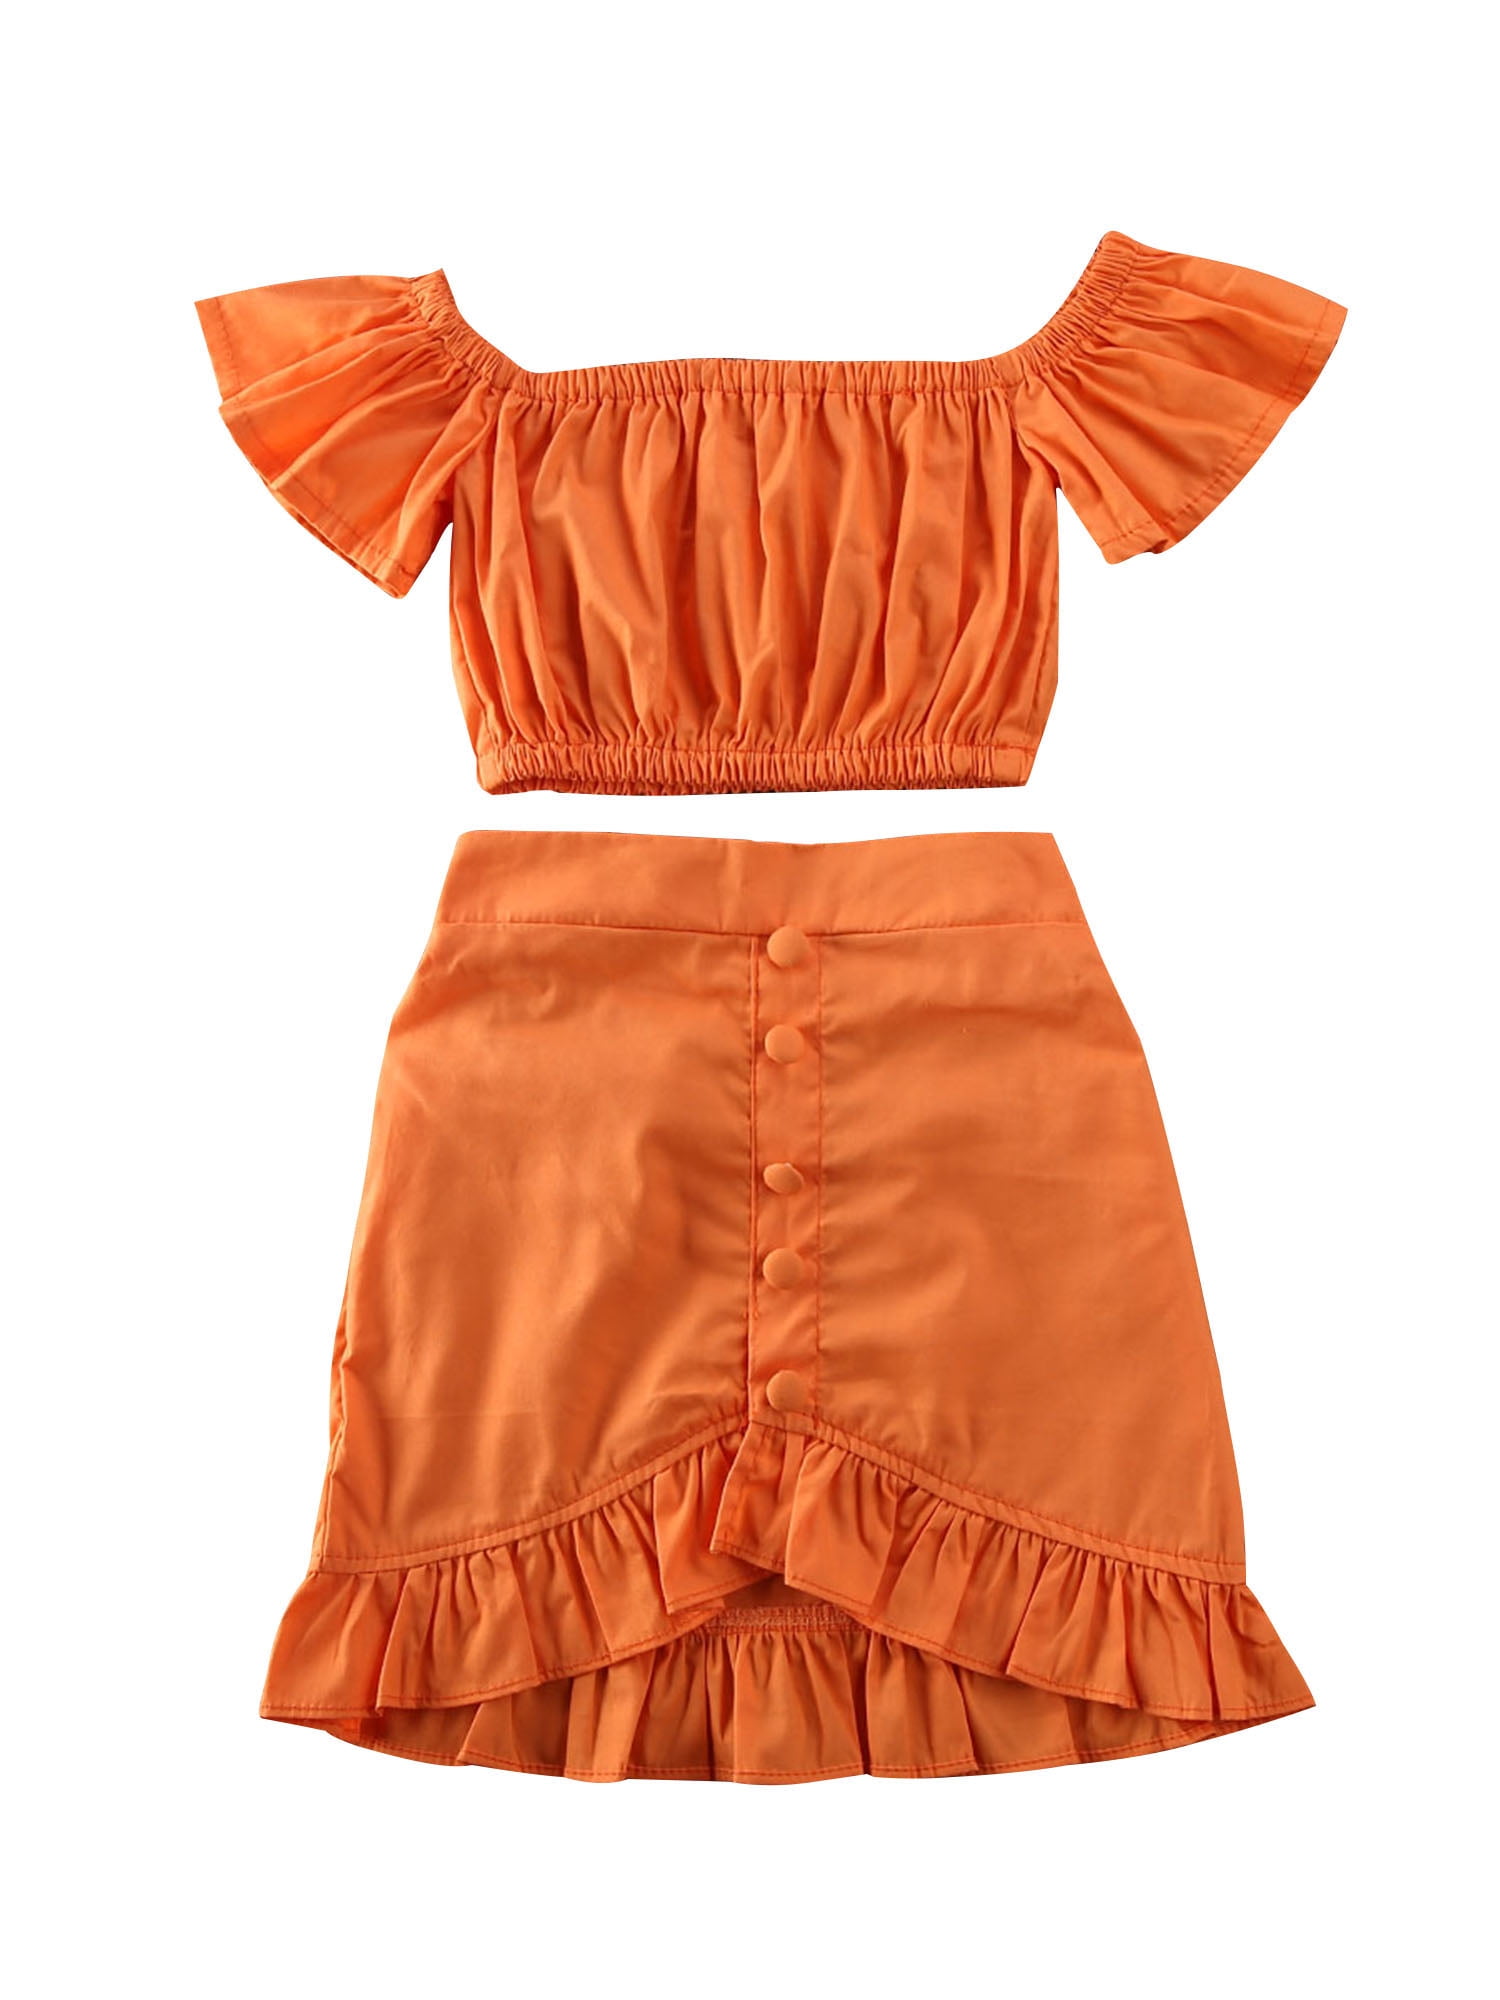 Emmababy - Toddler Kid Girl Clothes Orange Tops Dress Summer Outfits ...